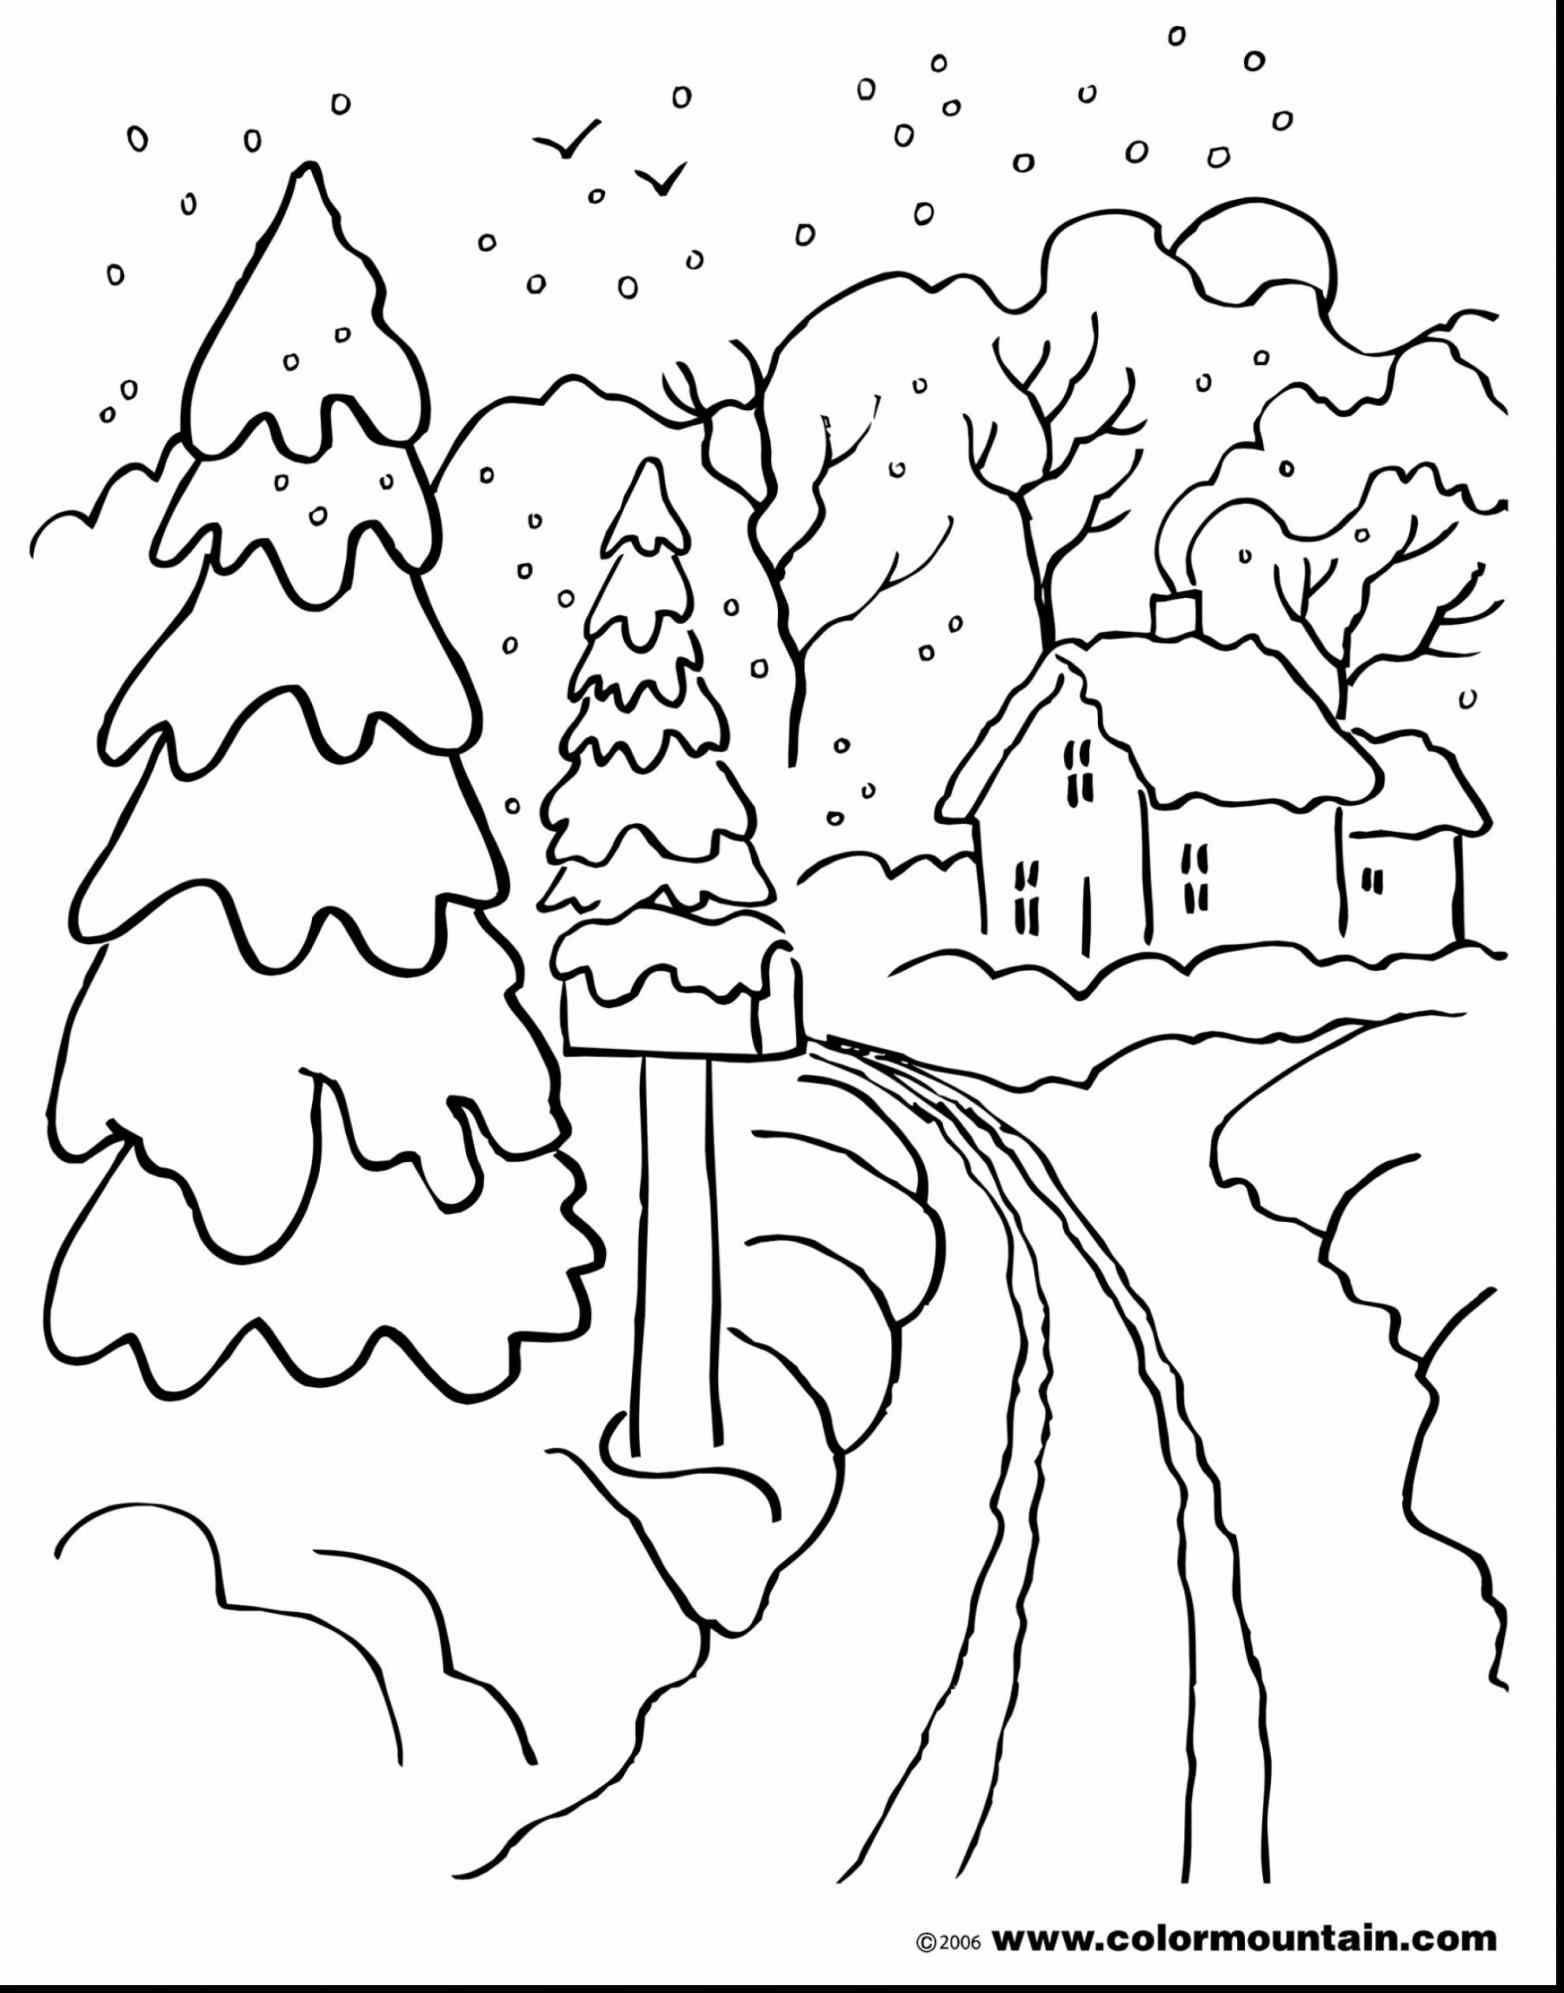 Free Coloring Pages Landscapes Printables at GetColorings.com | Free